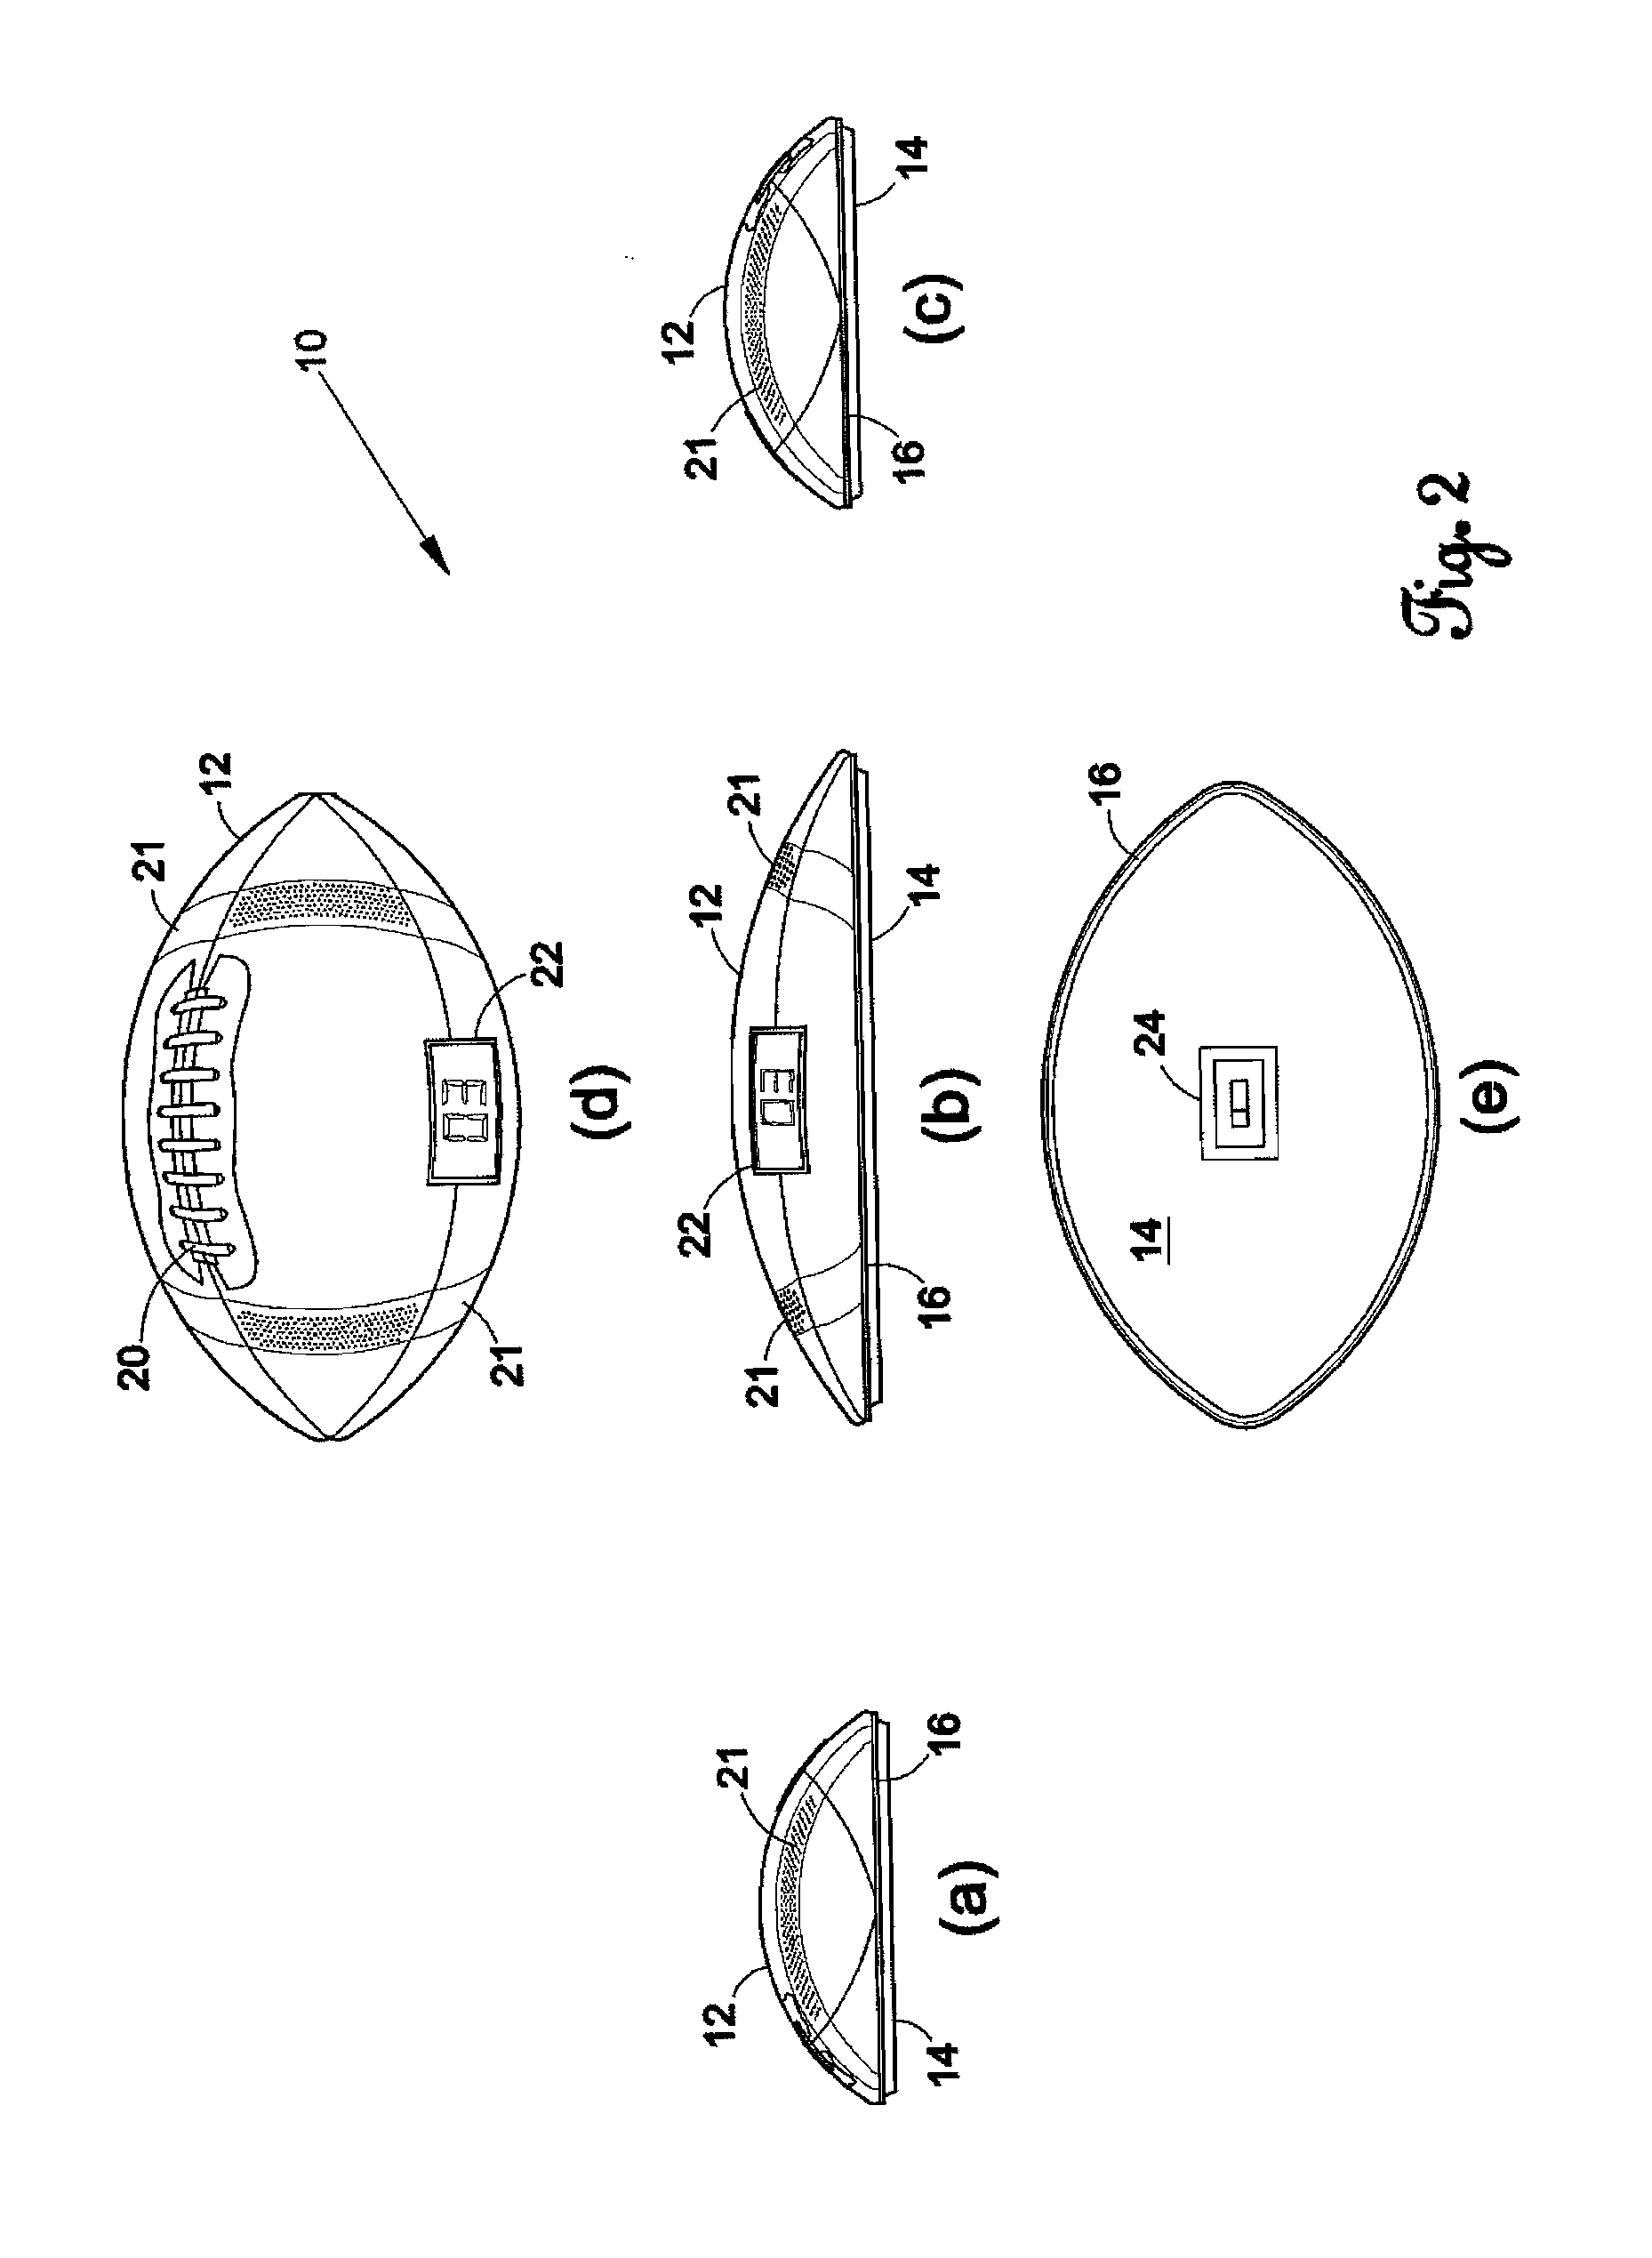 Football counting device